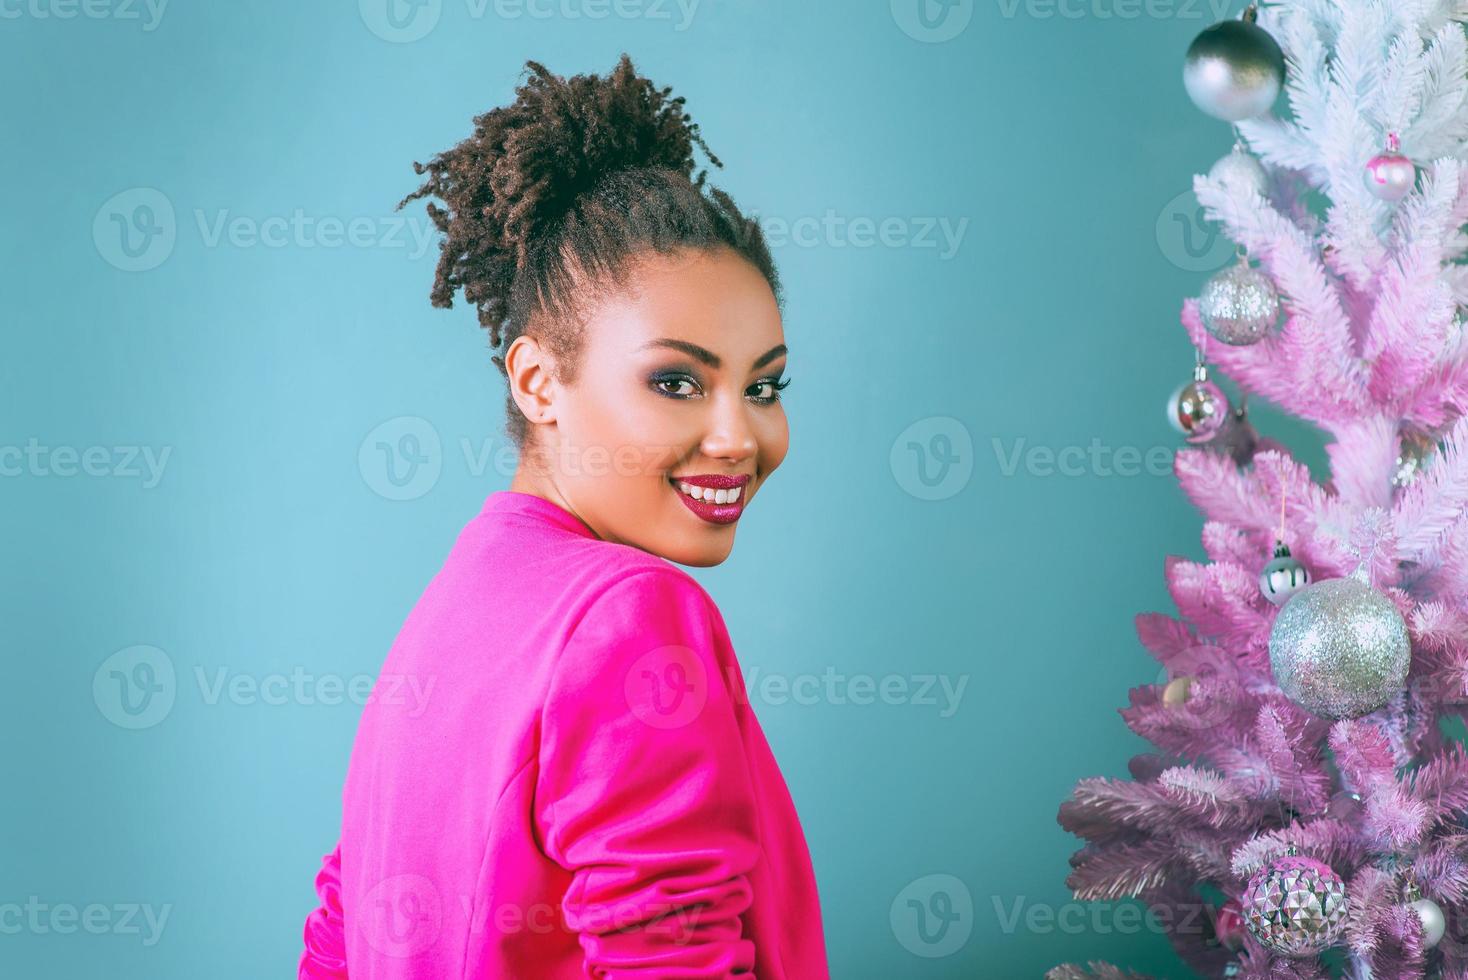 Happy and cheerful afro american woman with present box on the christmas tree background. Christmas, new year, happiness, holidays concept photo